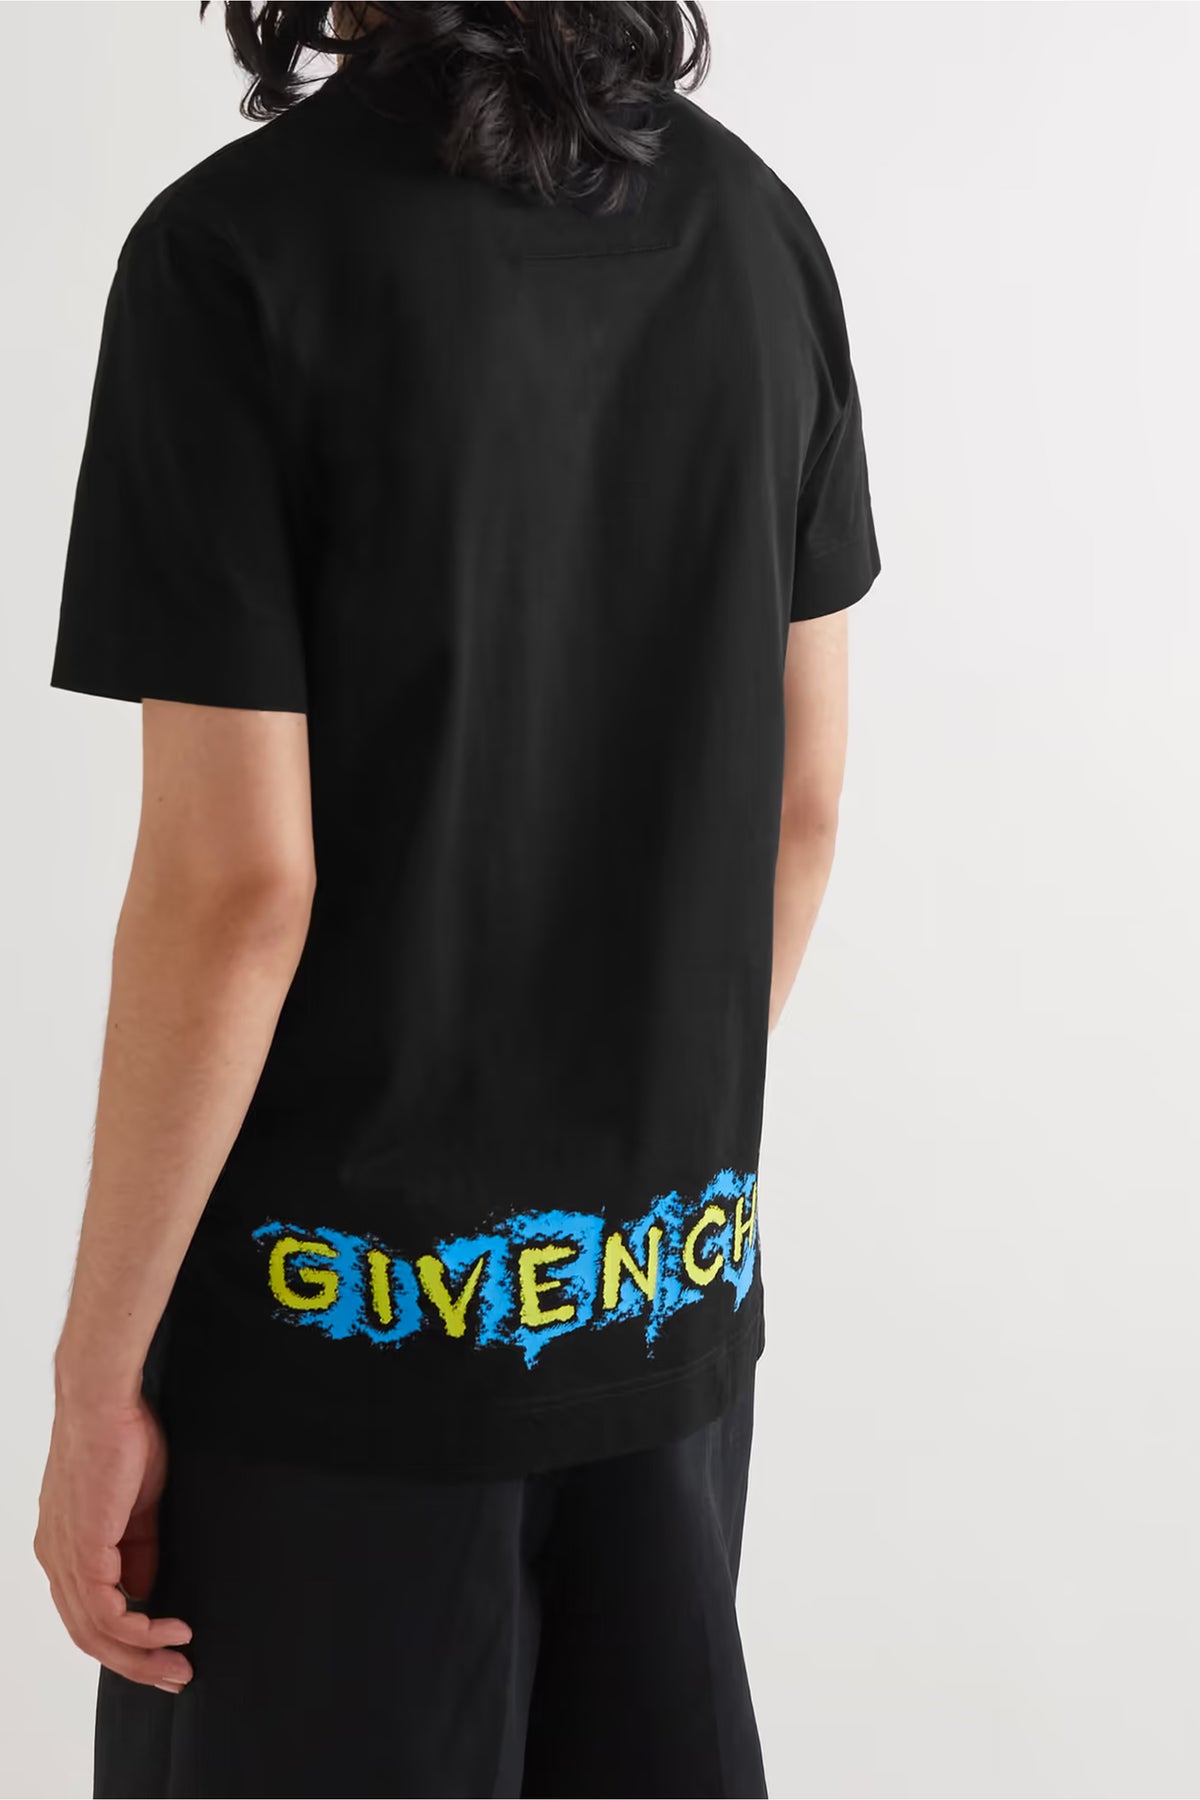 GIVENCHY Love Me Printed Cotton-Jersey T-Shirt